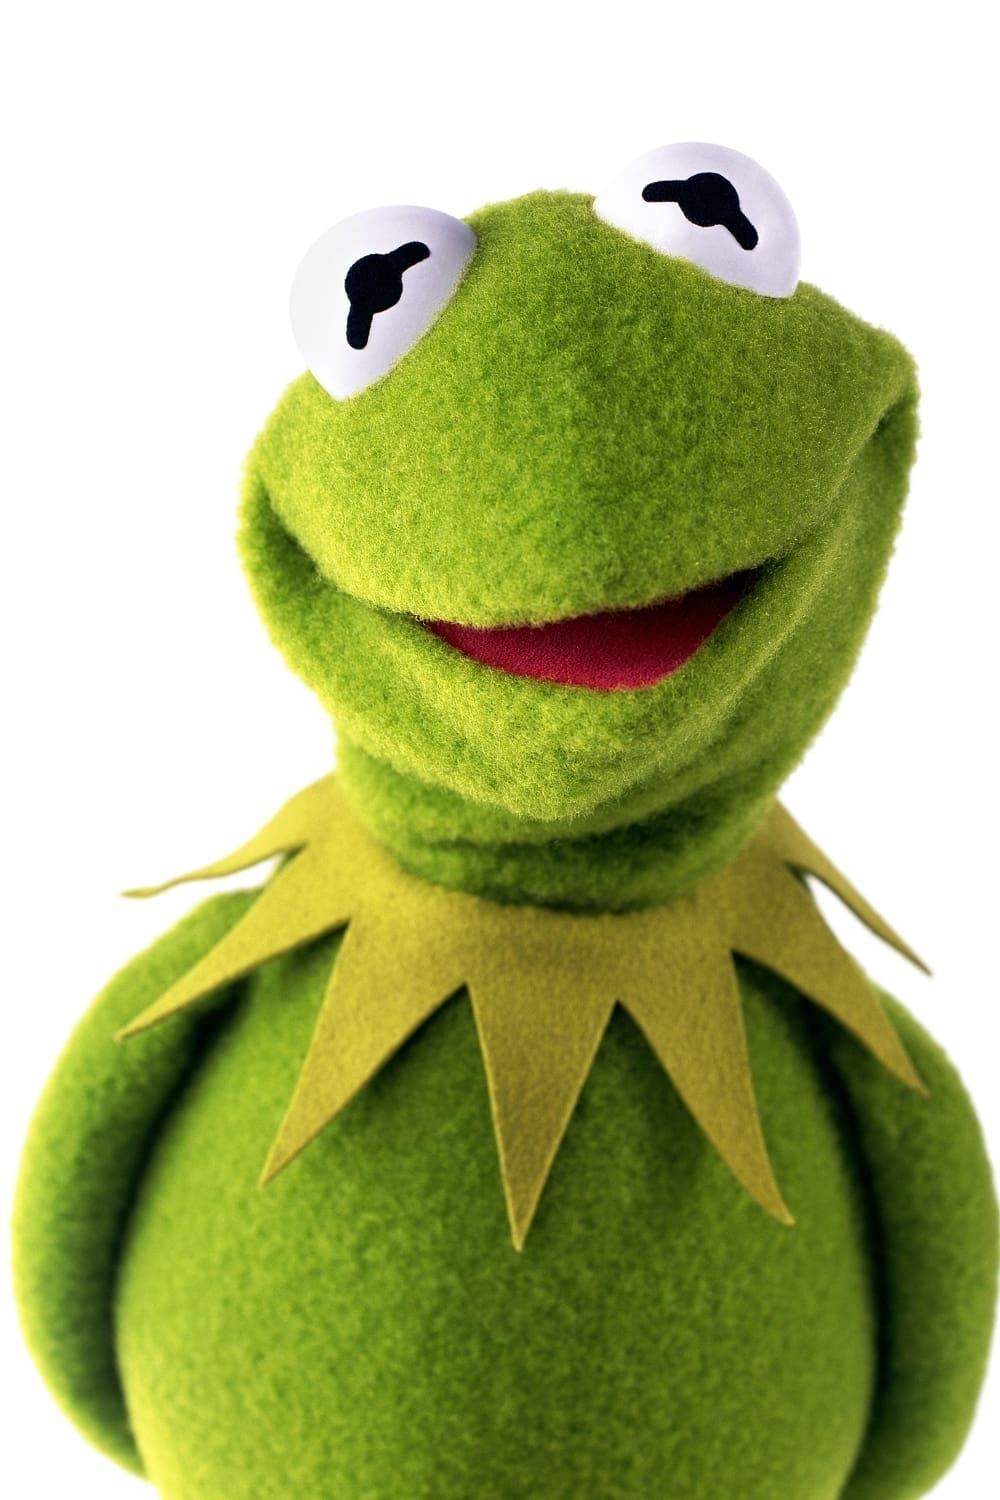 Kermit the Frog poster